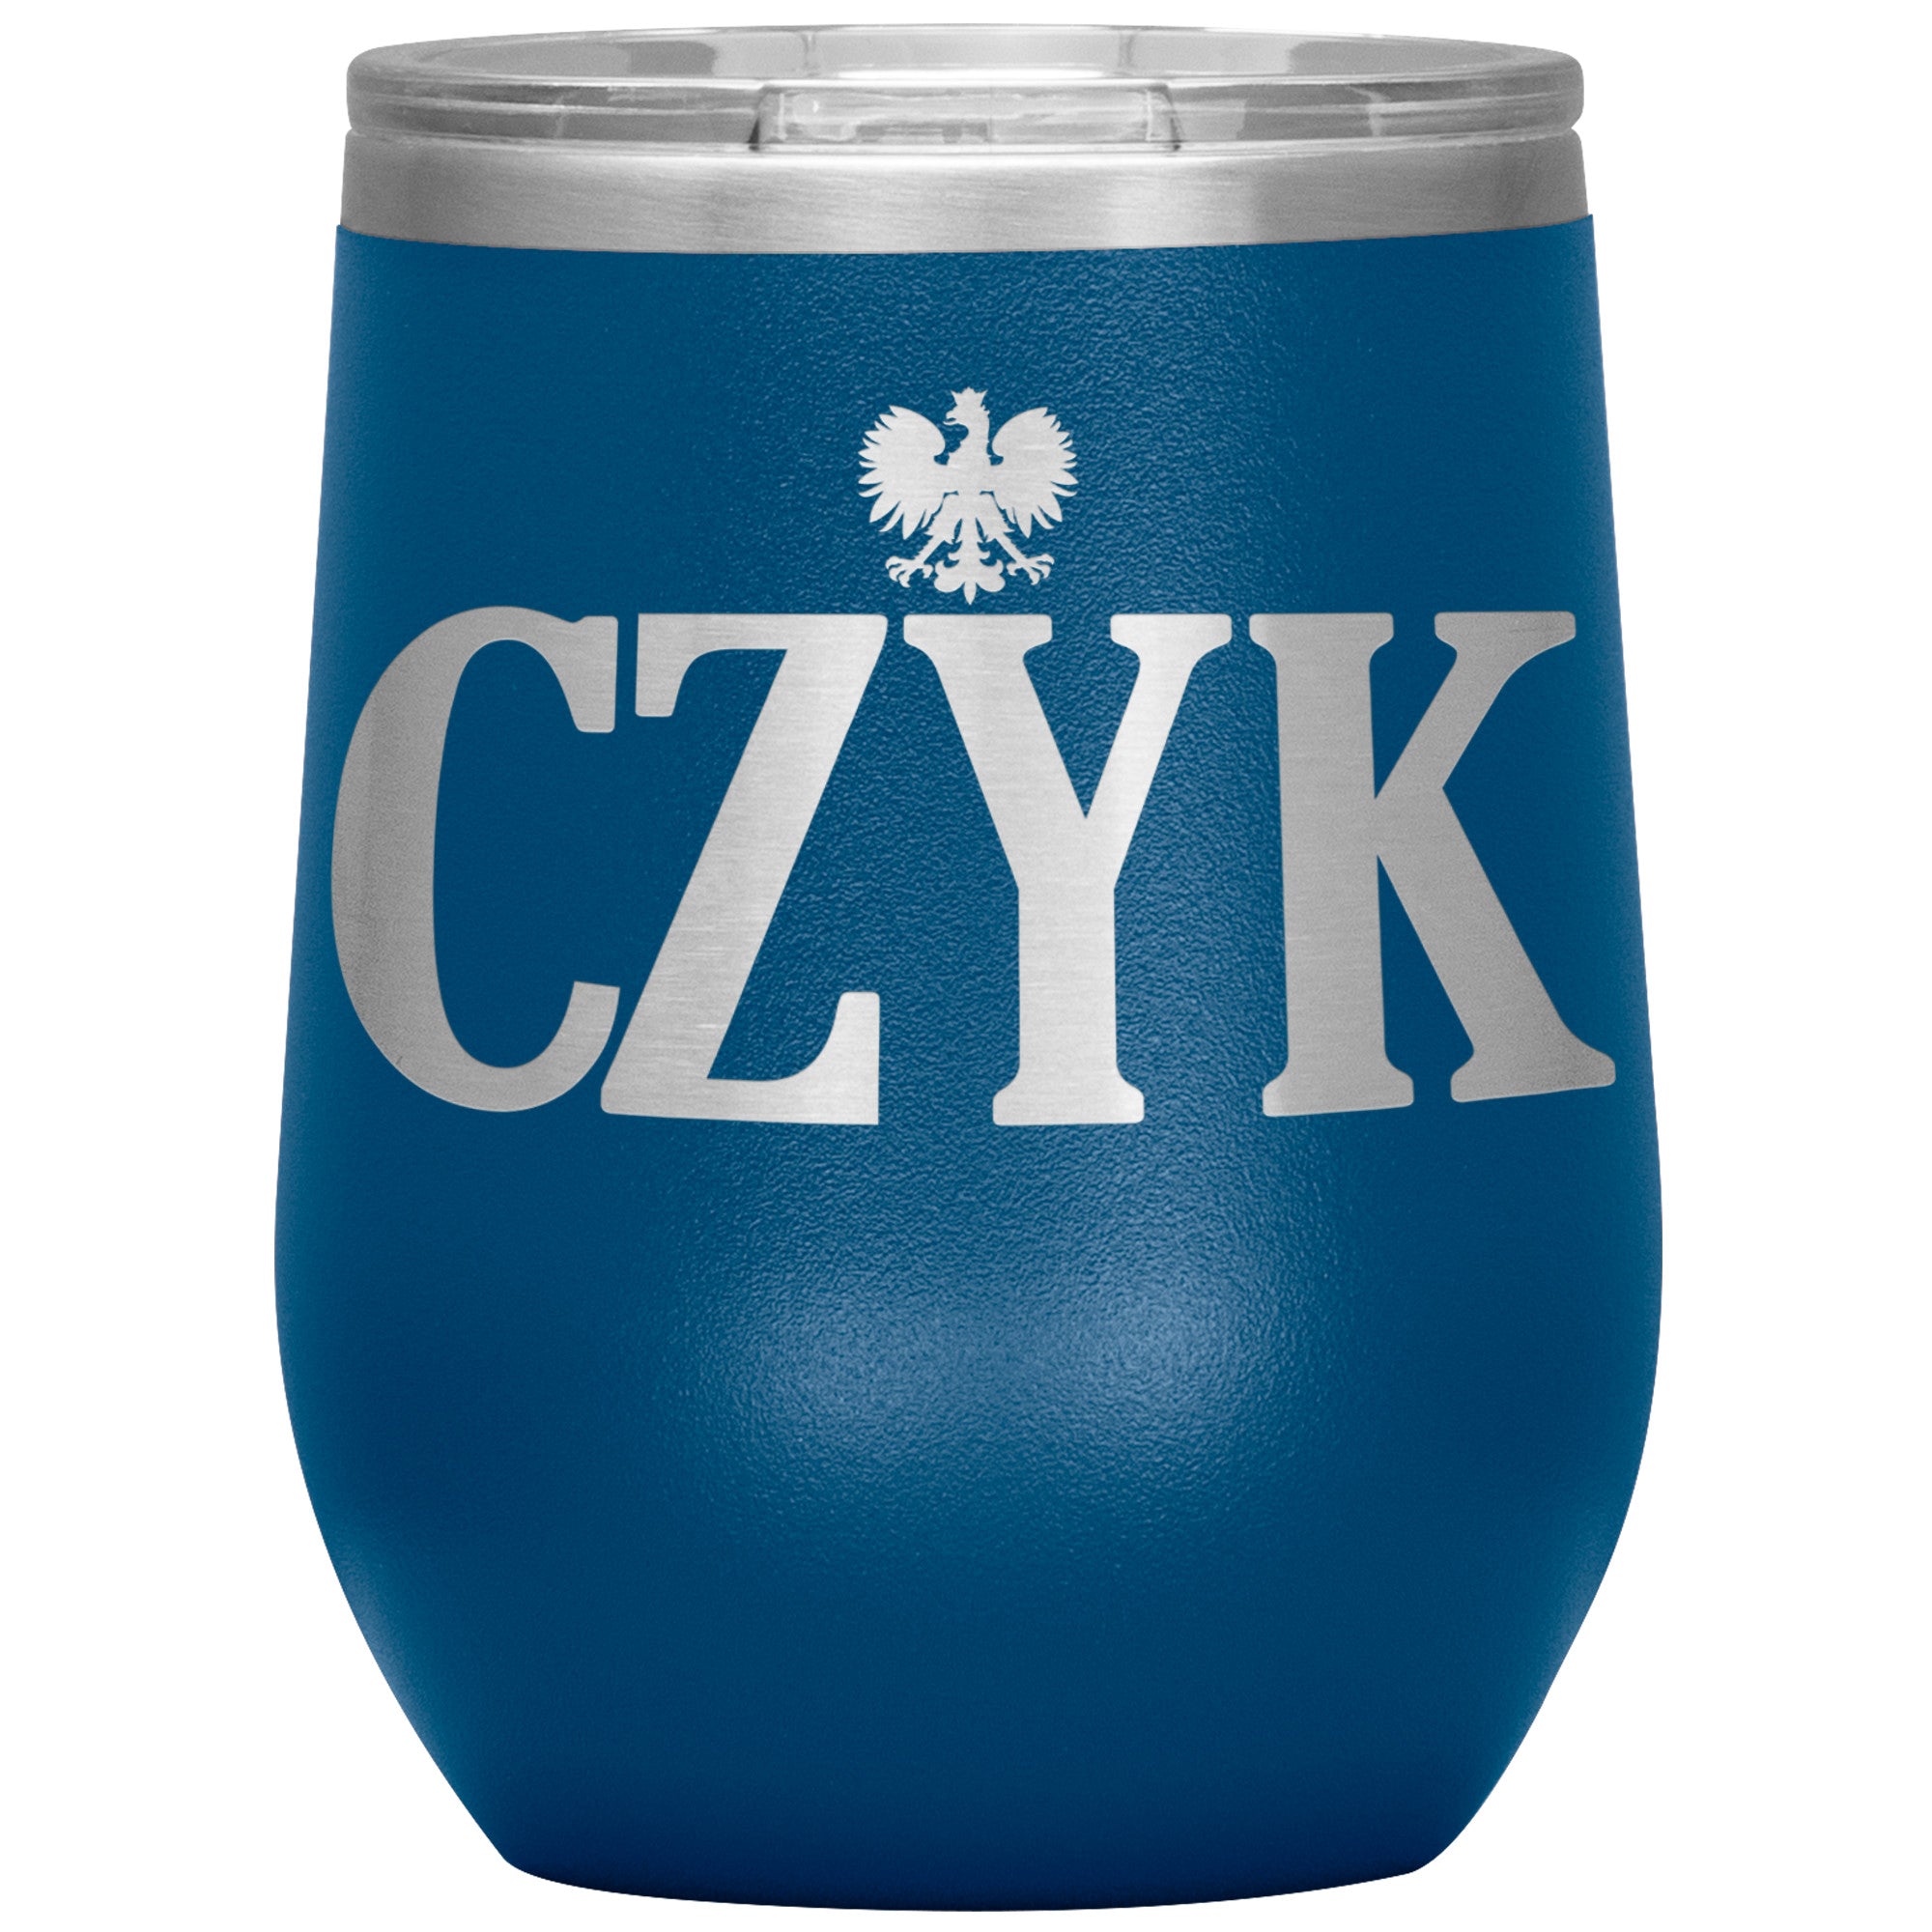 Polish Surnames Ending In CZYK Insulated Wine Tumbler Tumblers teelaunch Blue  